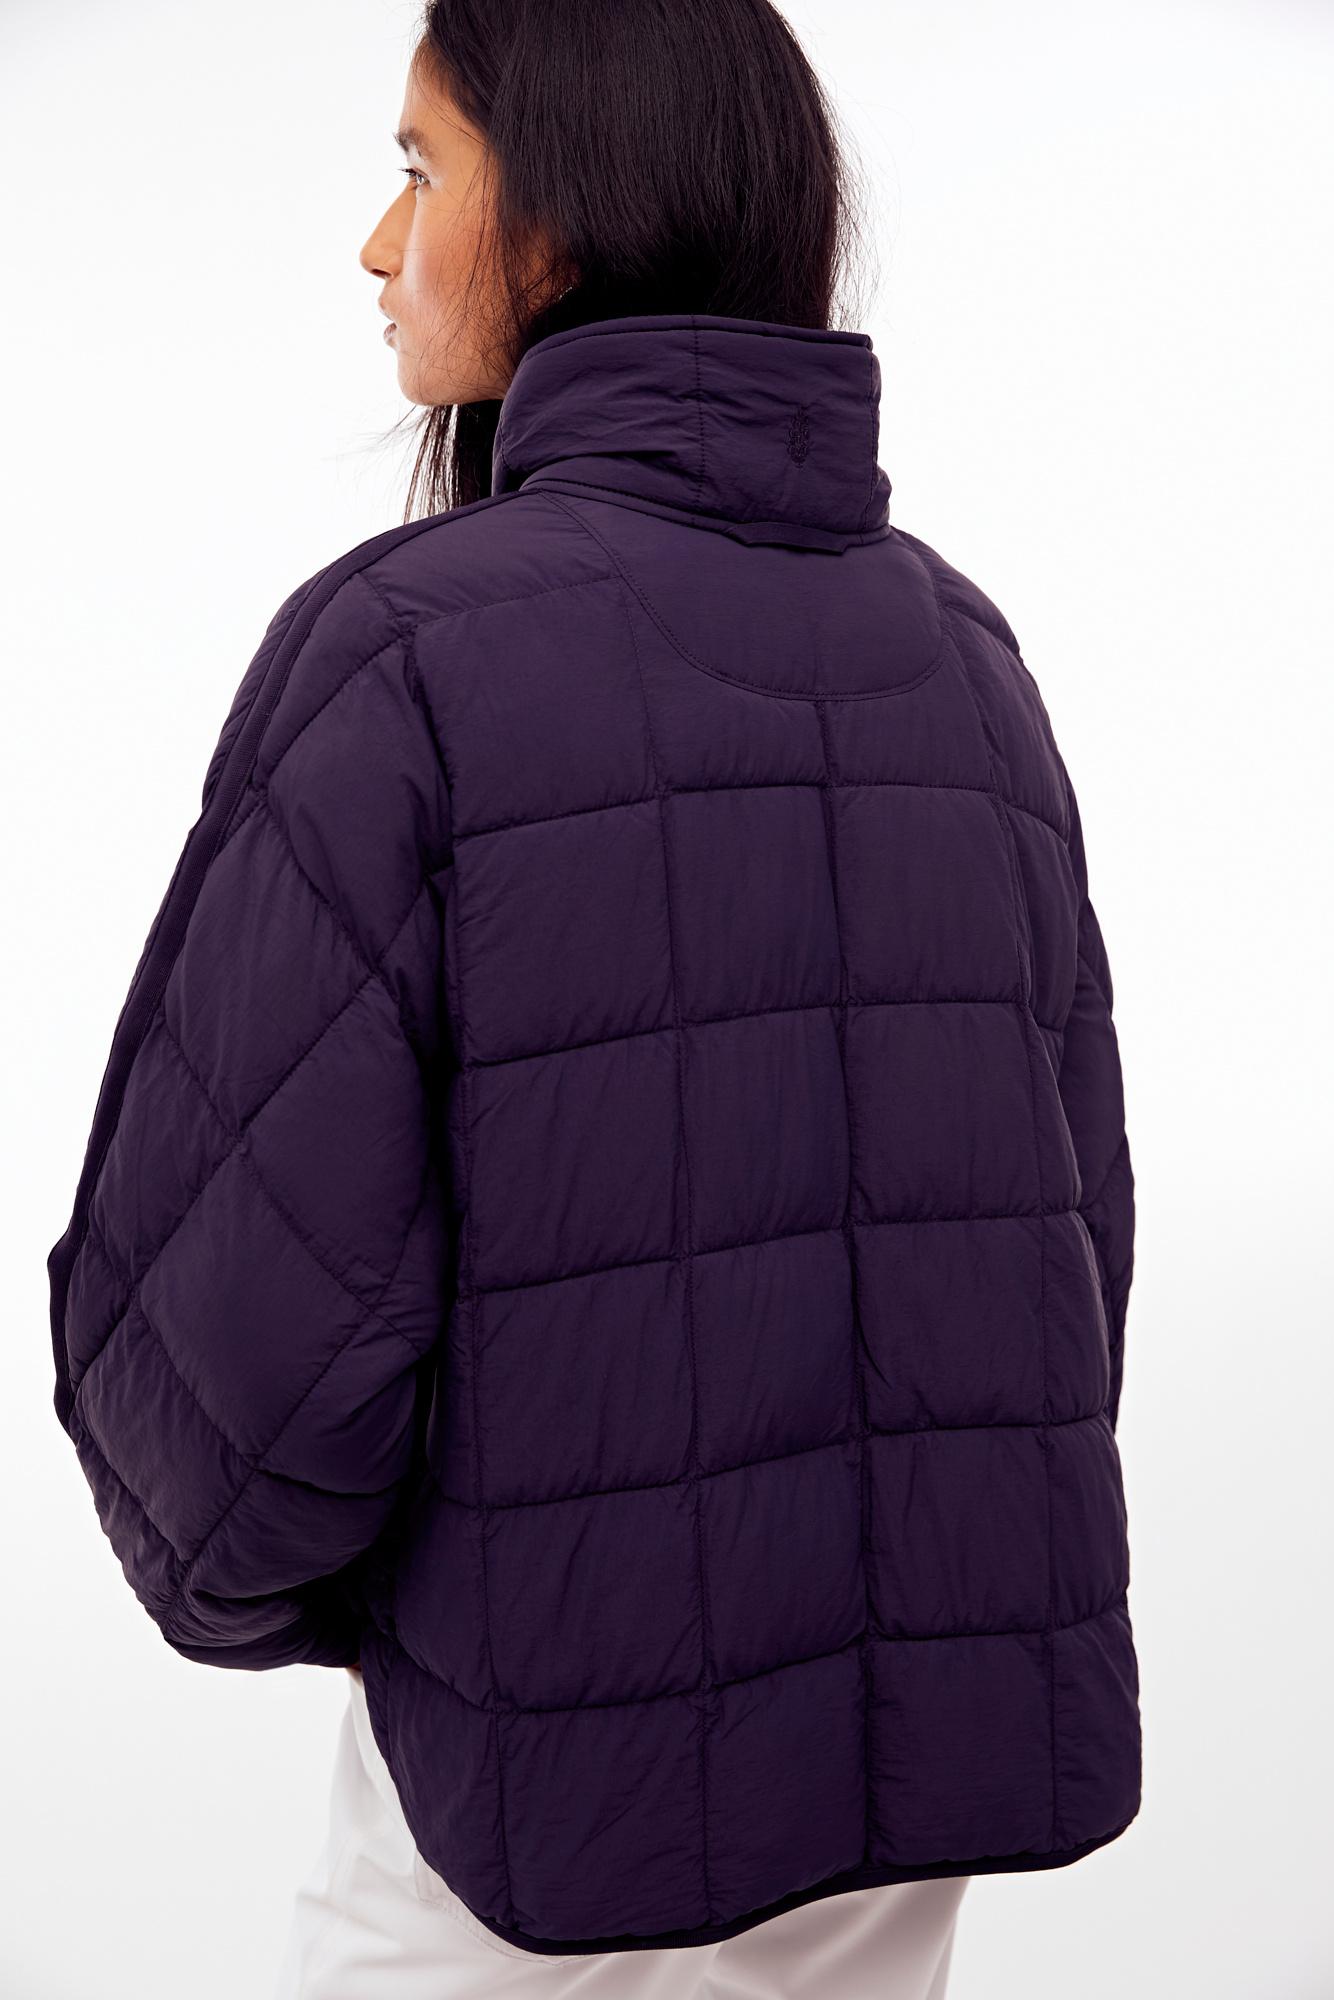 Free People Pippa Packable Puffer Jacket By Fp Movement in Blue